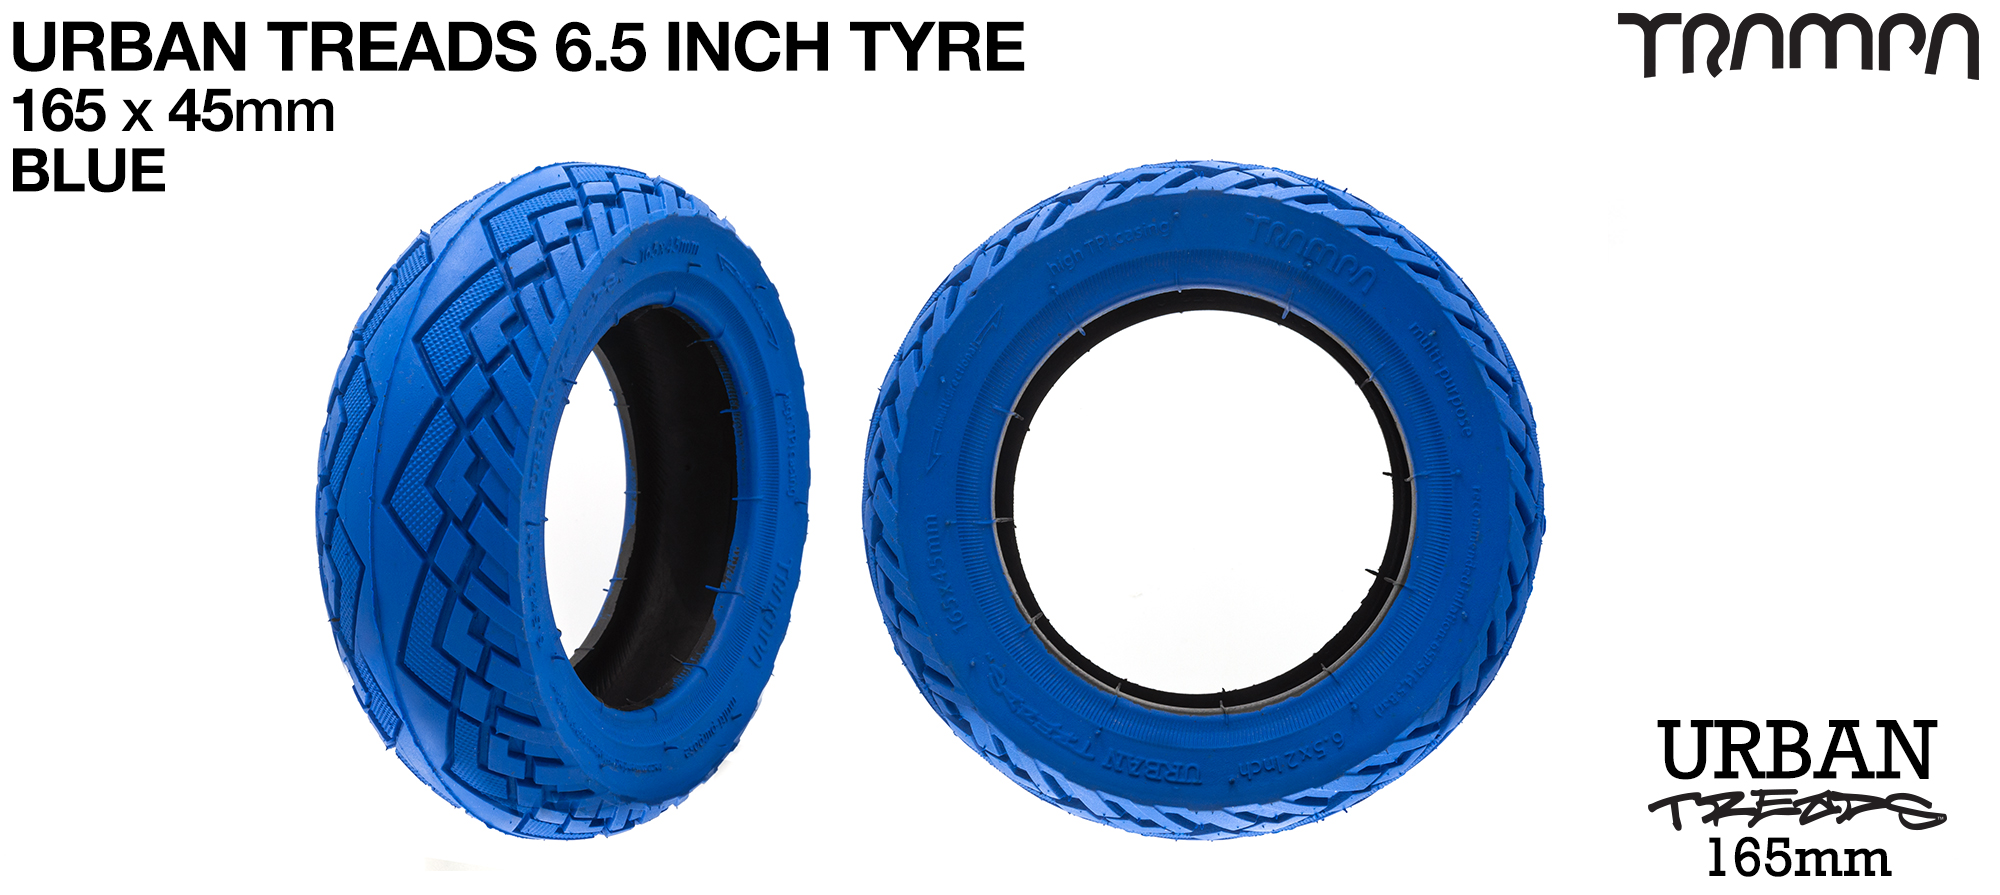 URBAN TREADS 6 Inch Tyre measures 3.75x 1.75x 6.5 Inch or 165x 45mm with 3.75 inch Rim & fits all 3.75 inch Hubs